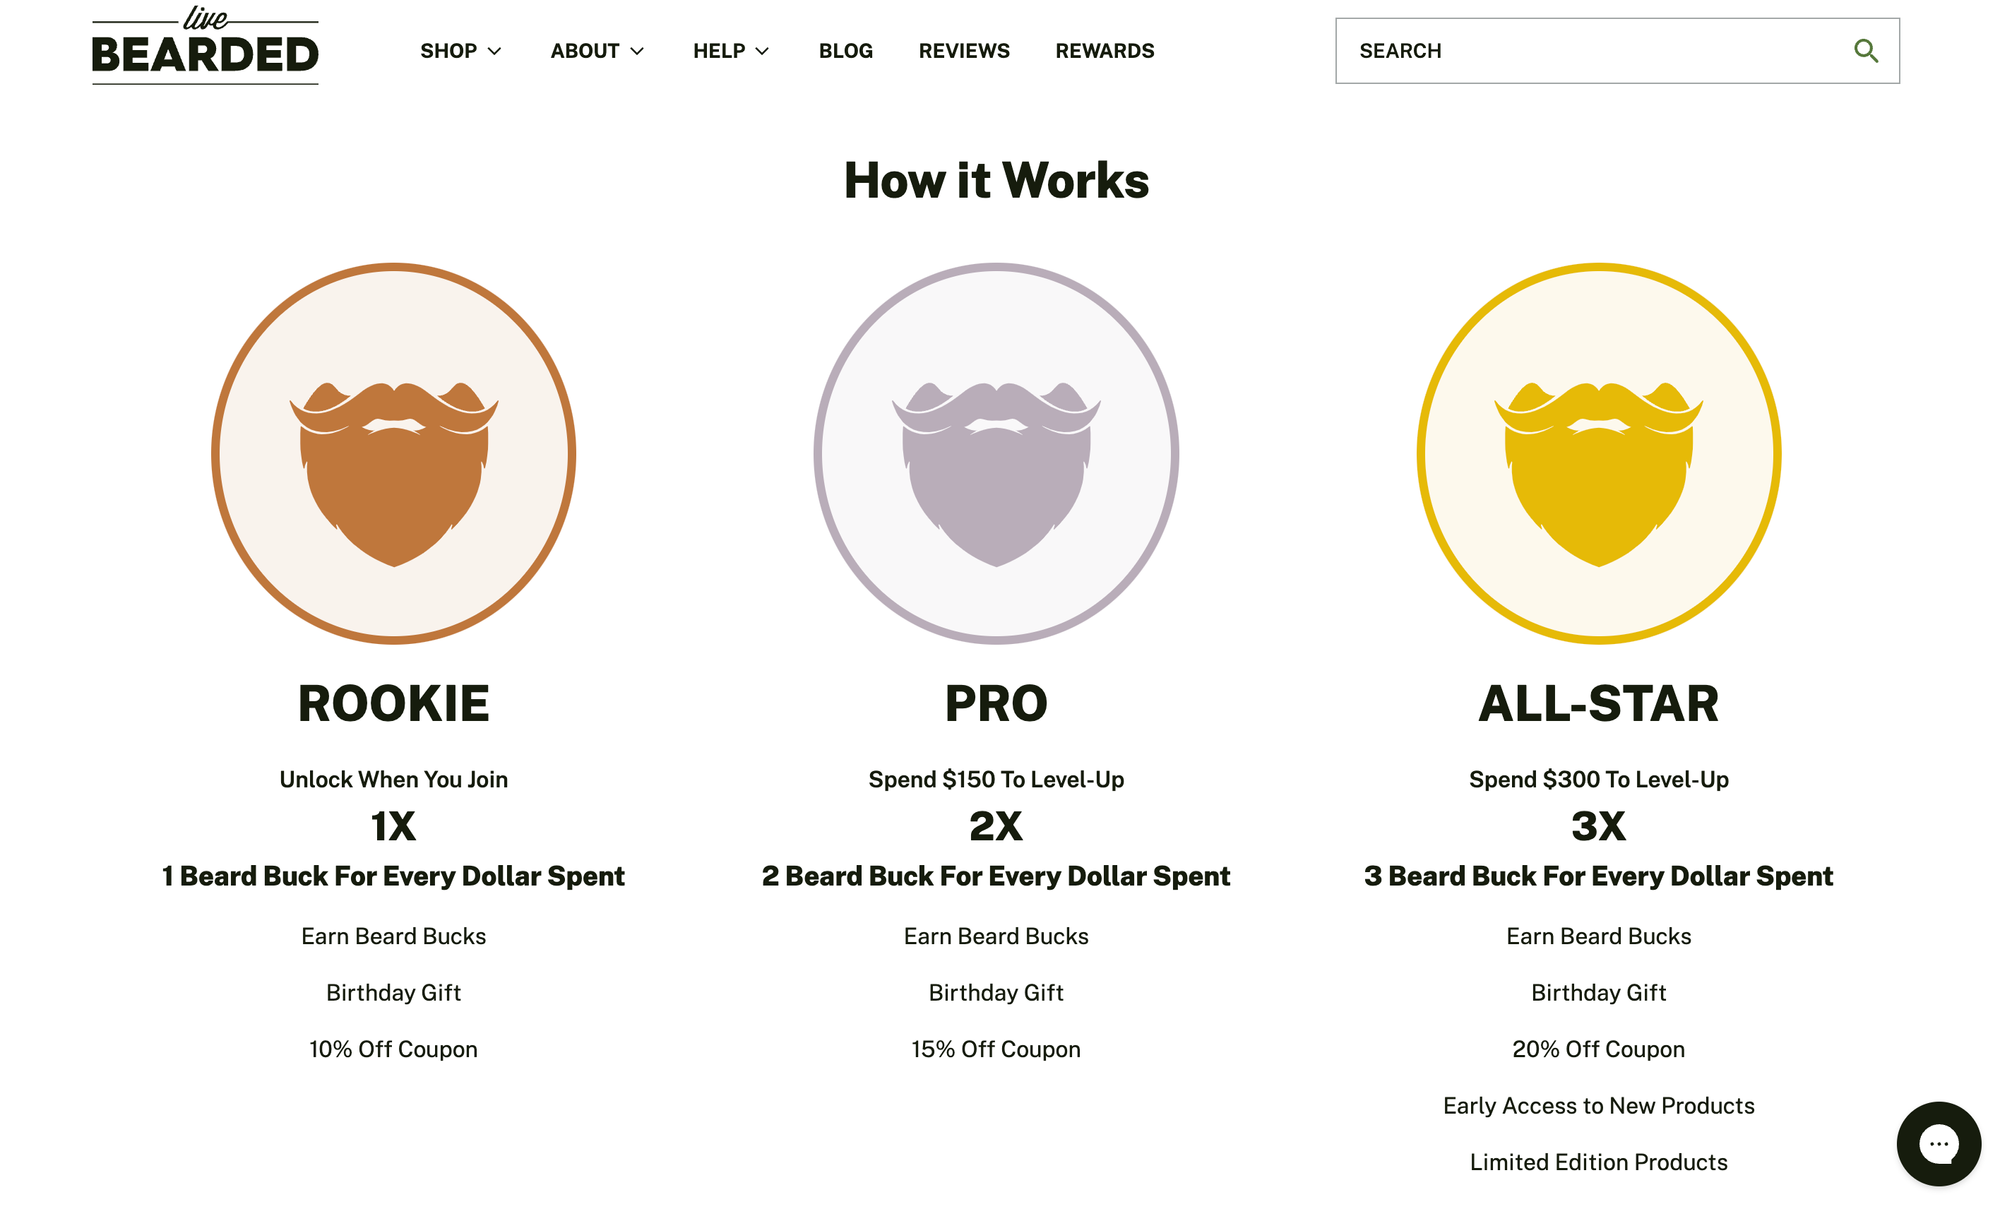 A screenshot of Live Bearded's loyalty program page explaining its 3 VIP tiers and the benefits and perks of each.